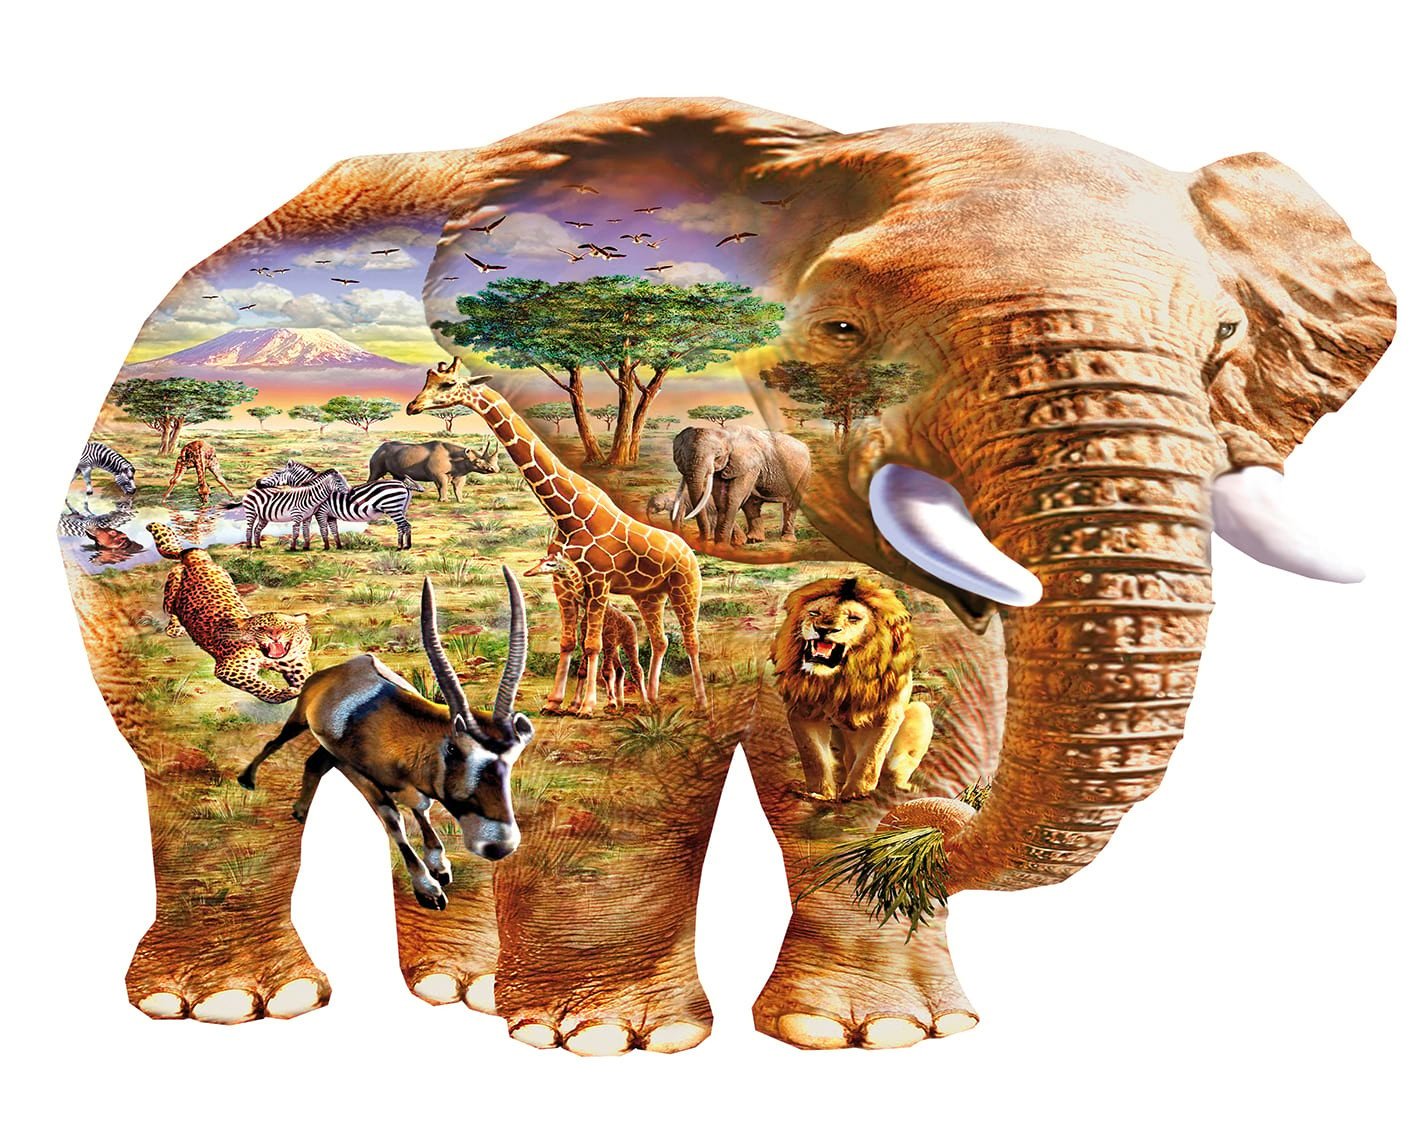 Elephant Exclusive Wildlife Puzzles Ravensburger King of The Savannah 300 Piece Jigsaw Puzzle for Adults & Kids Age 10 Years Up Animal 